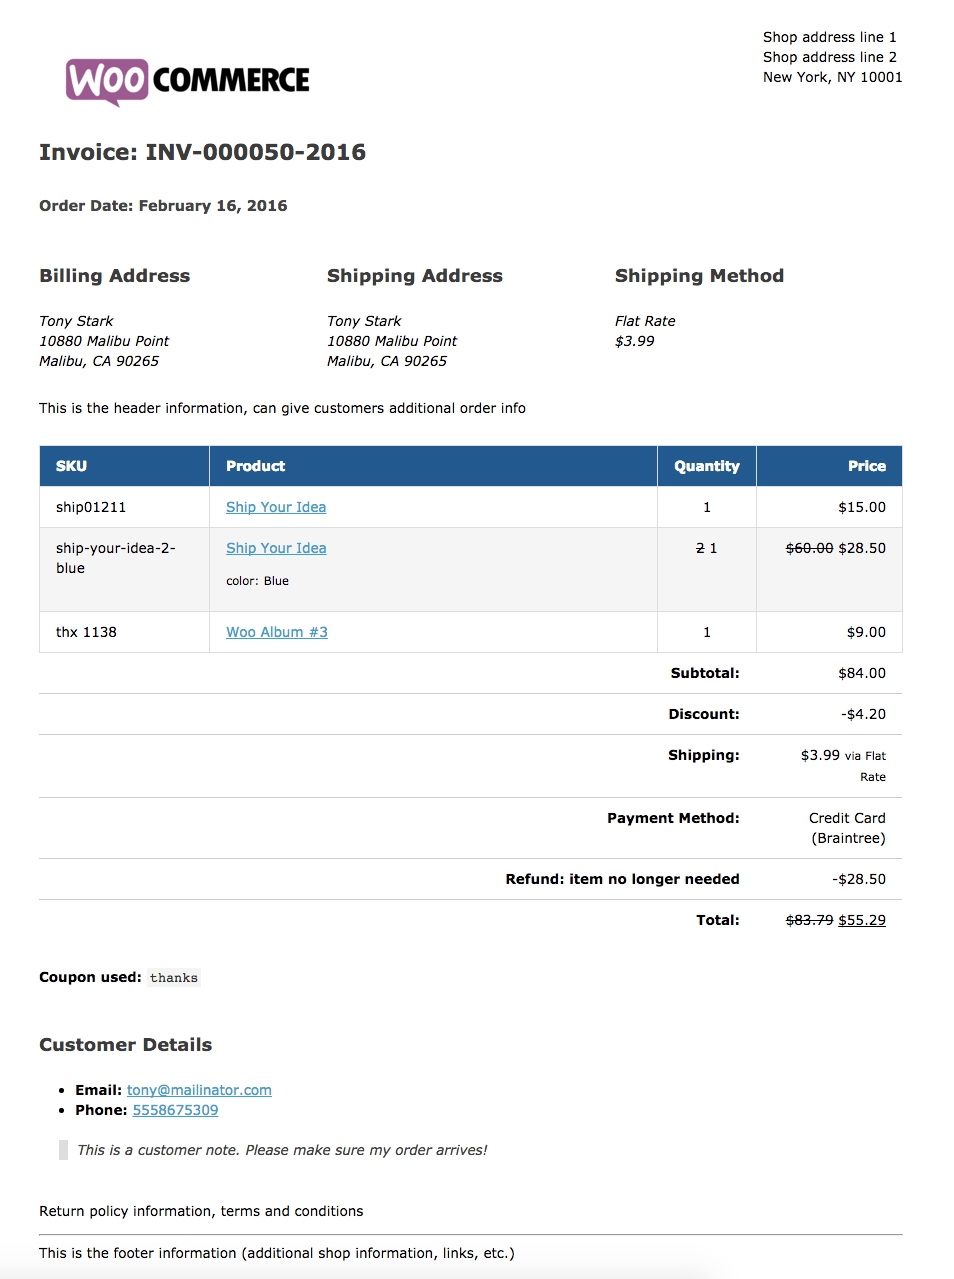 woocommerce print invoices packing lists woocommerce packing list invoice